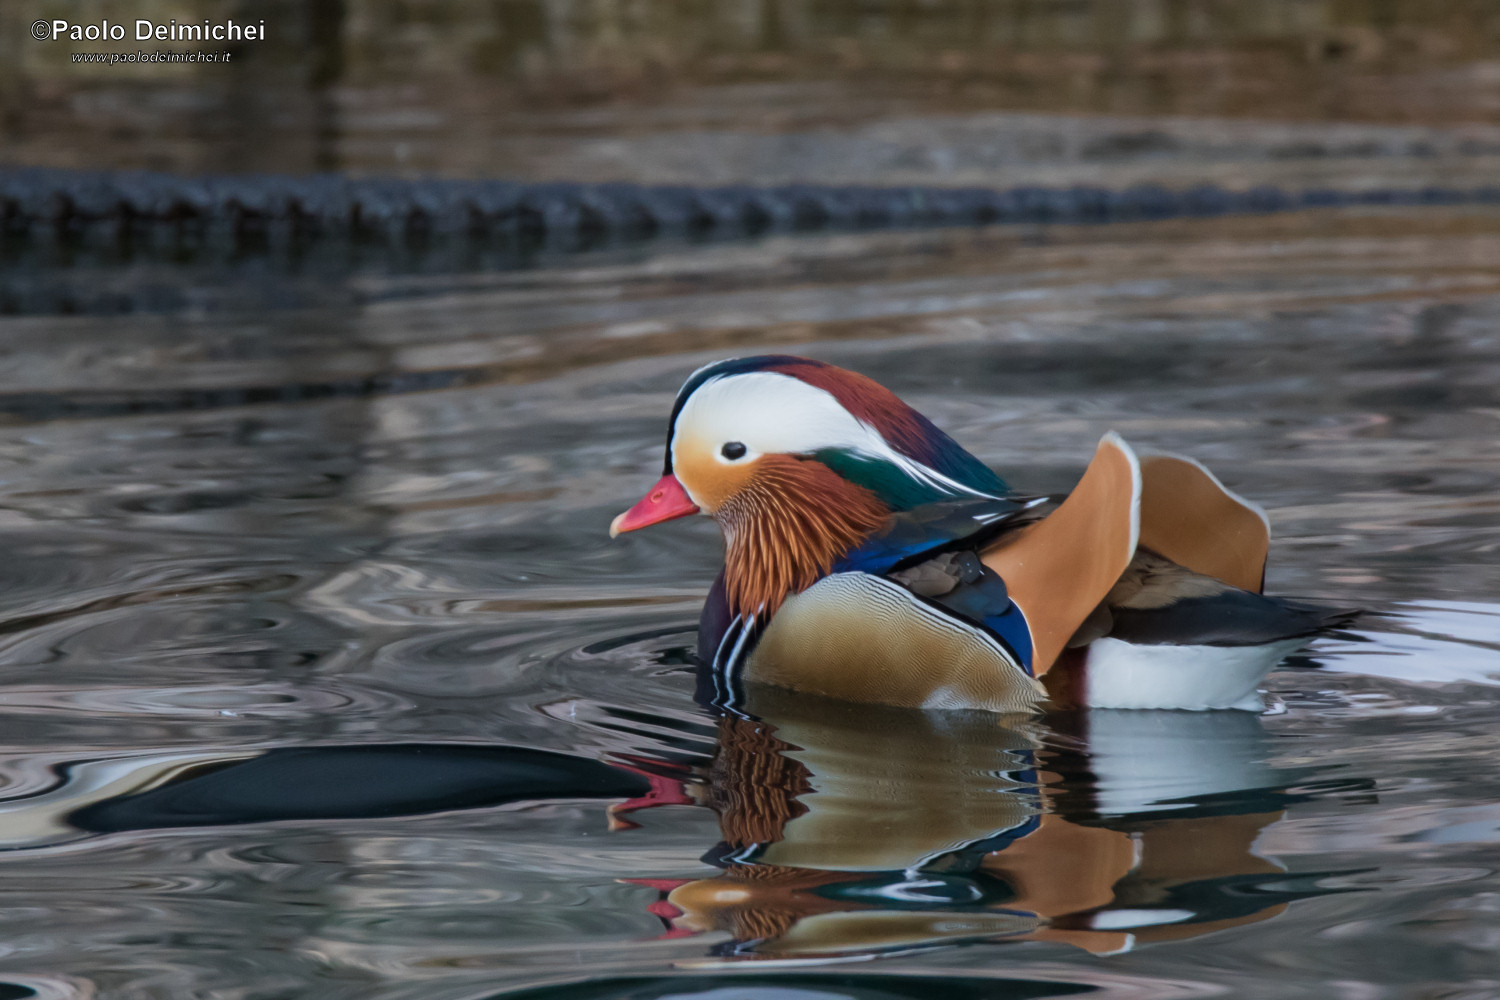 The spectacular Mandarin Duck, among the reflections...